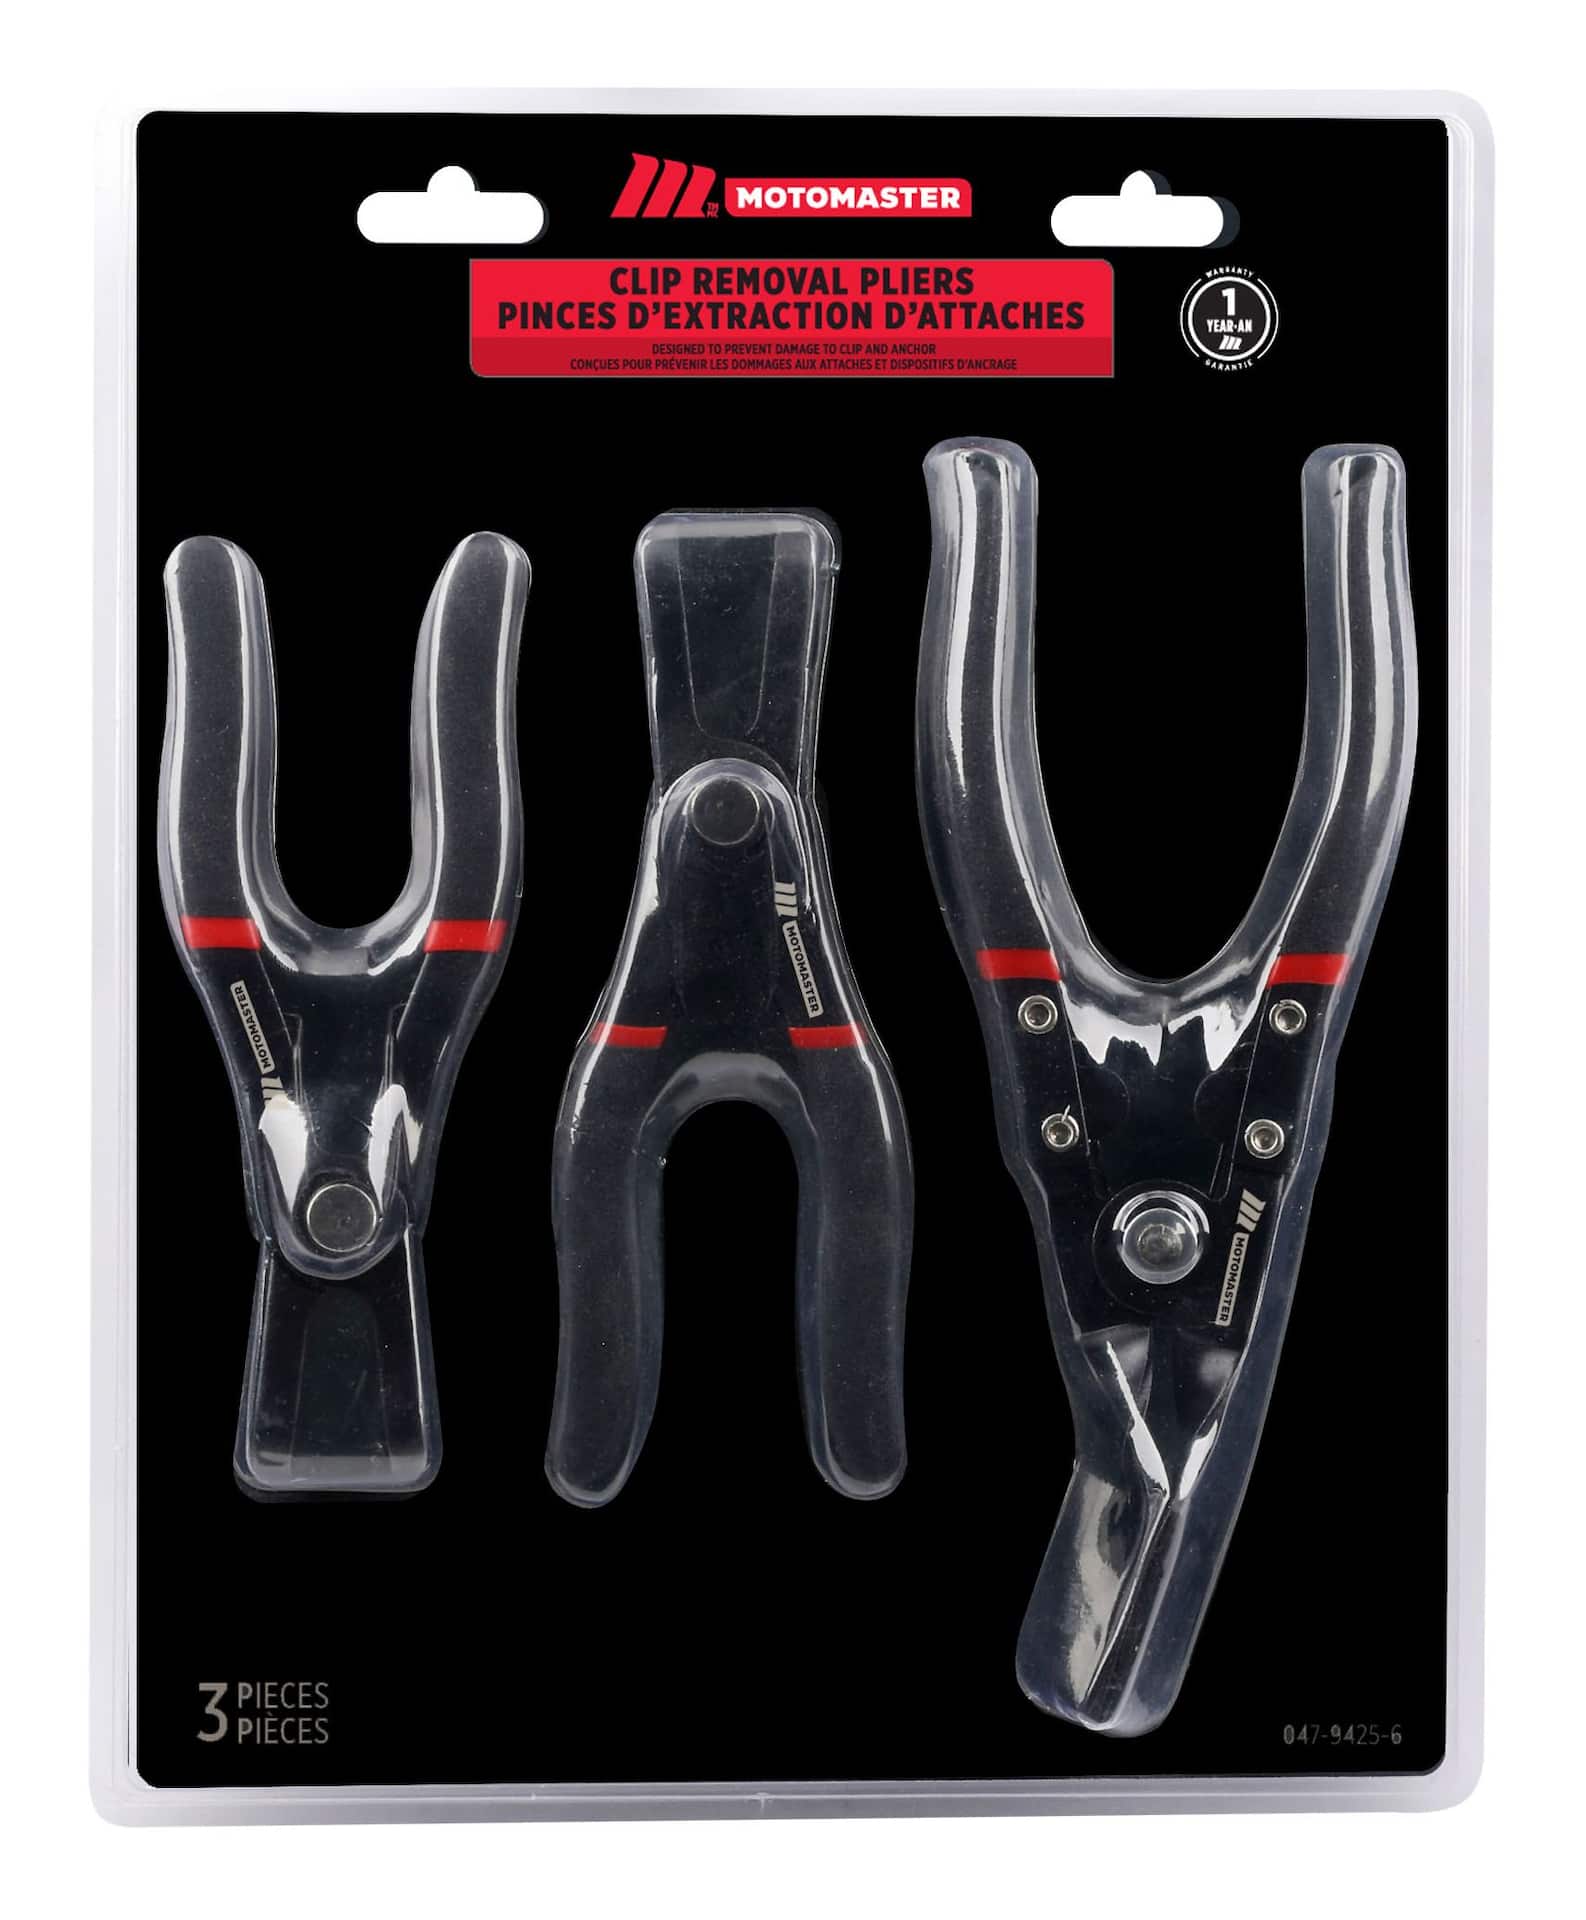 https://media-www.canadiantire.ca/product/automotive/car-care-accessories/auto-body-repair/0479425/3-piece-body-clip-removal-pliers-set-e92d46ab-c909-4080-a8b3-5a33ebe021c6-jpgrendition.jpg